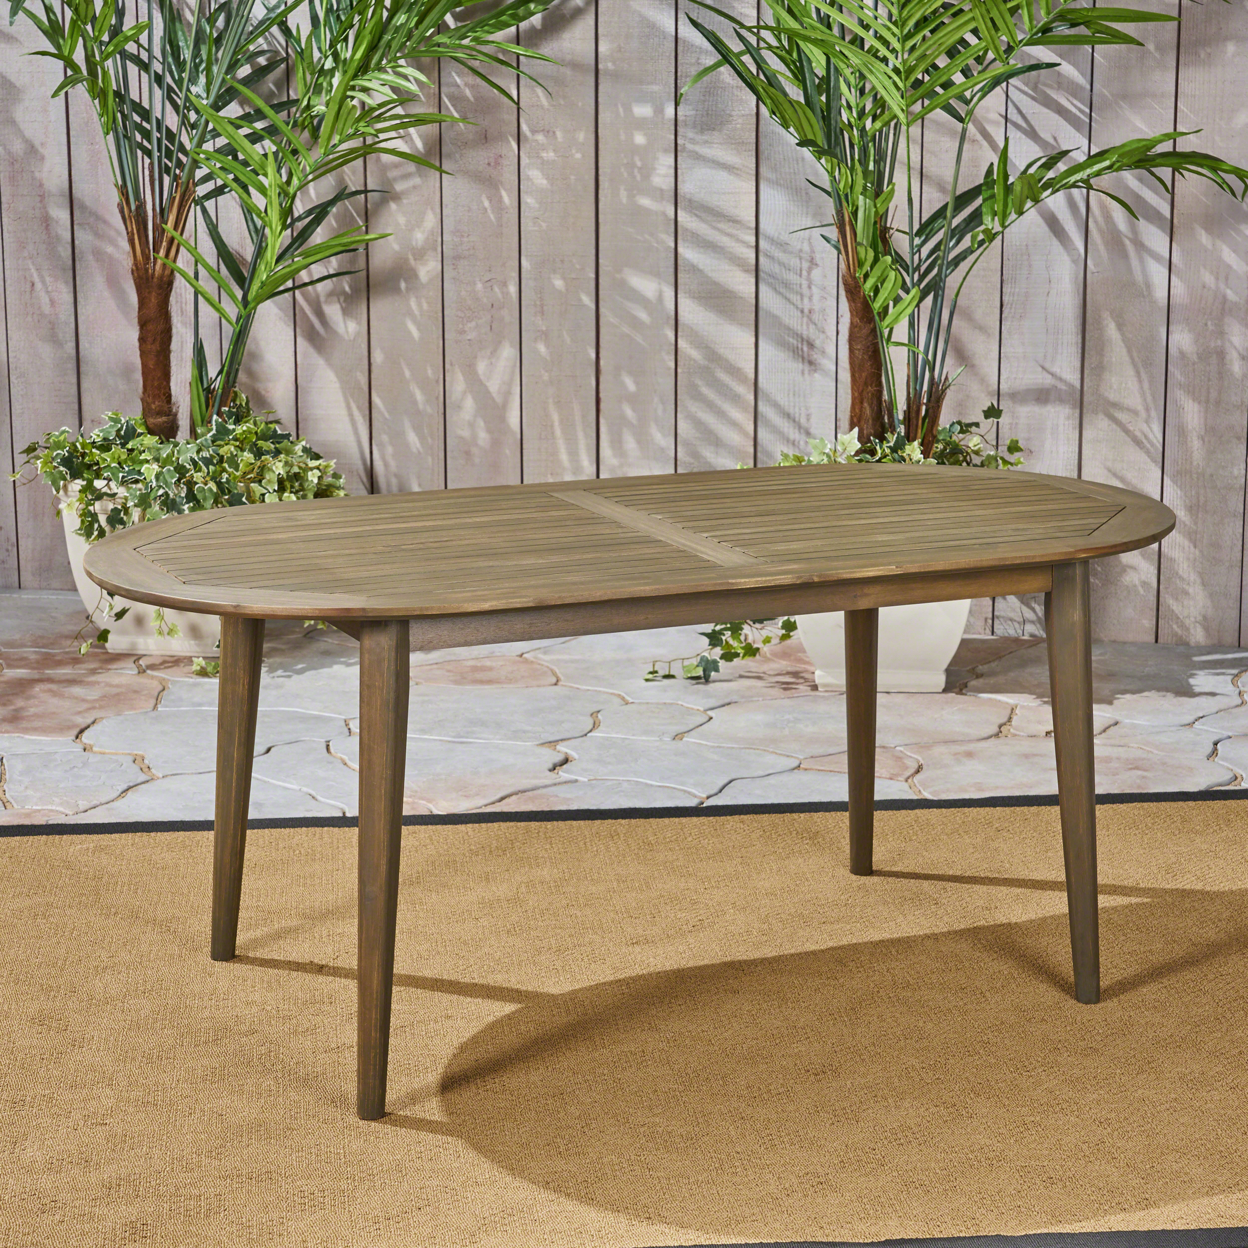 Stanford Outdoor Wood Oval Dining Table - Gray